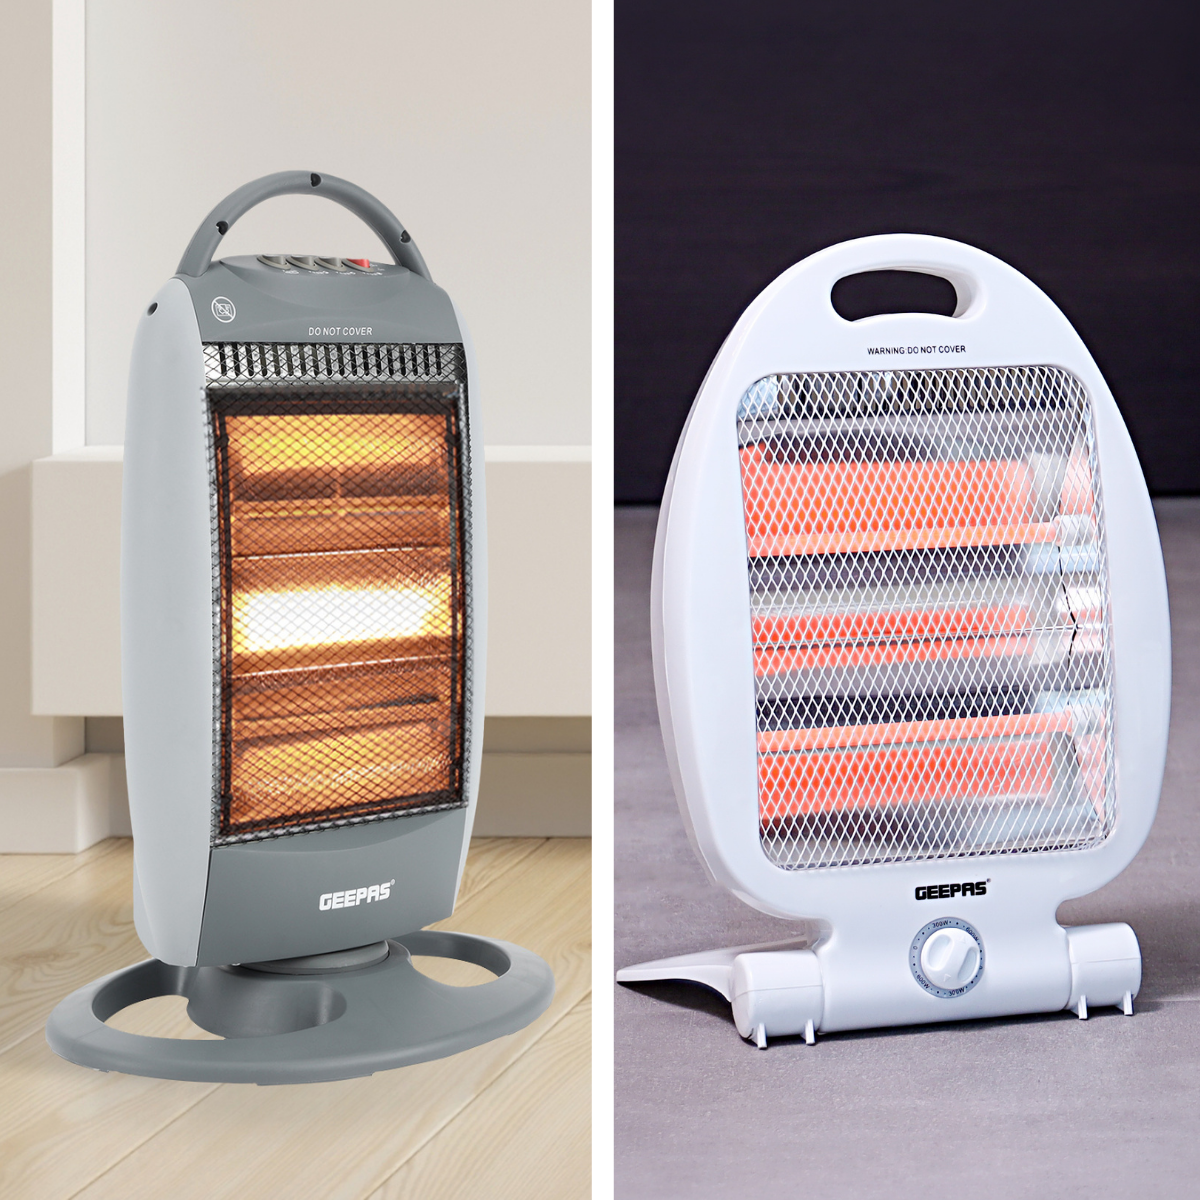 Quartz Heater vs Halogen Heater: What Is The Difference